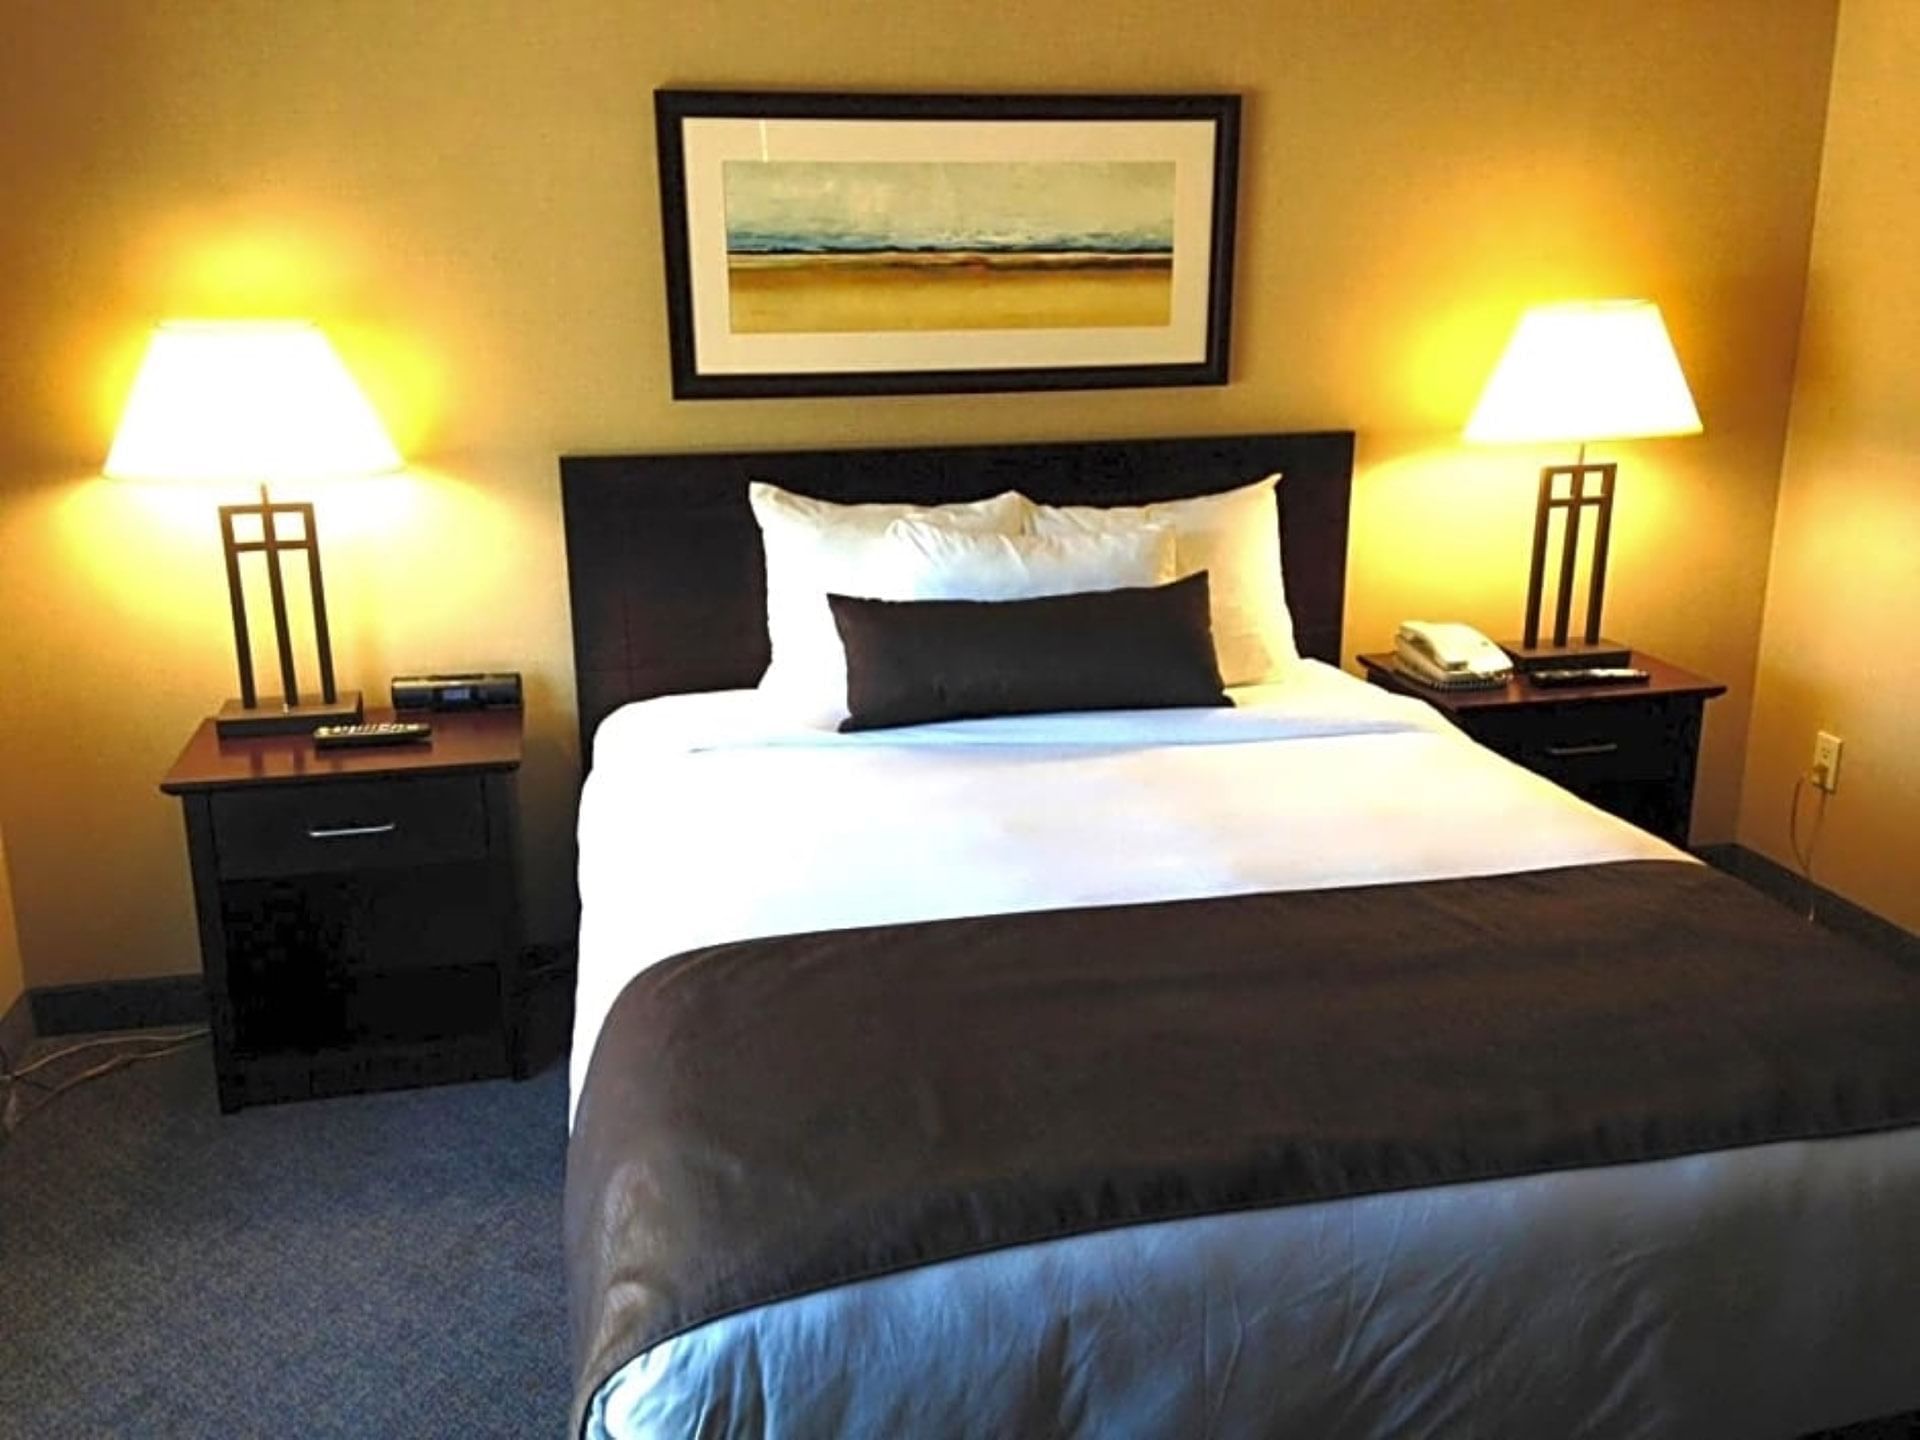 Nightstands with bed lamps by the king bed in Studio One Queen Bed at Franklin Suite Hotel